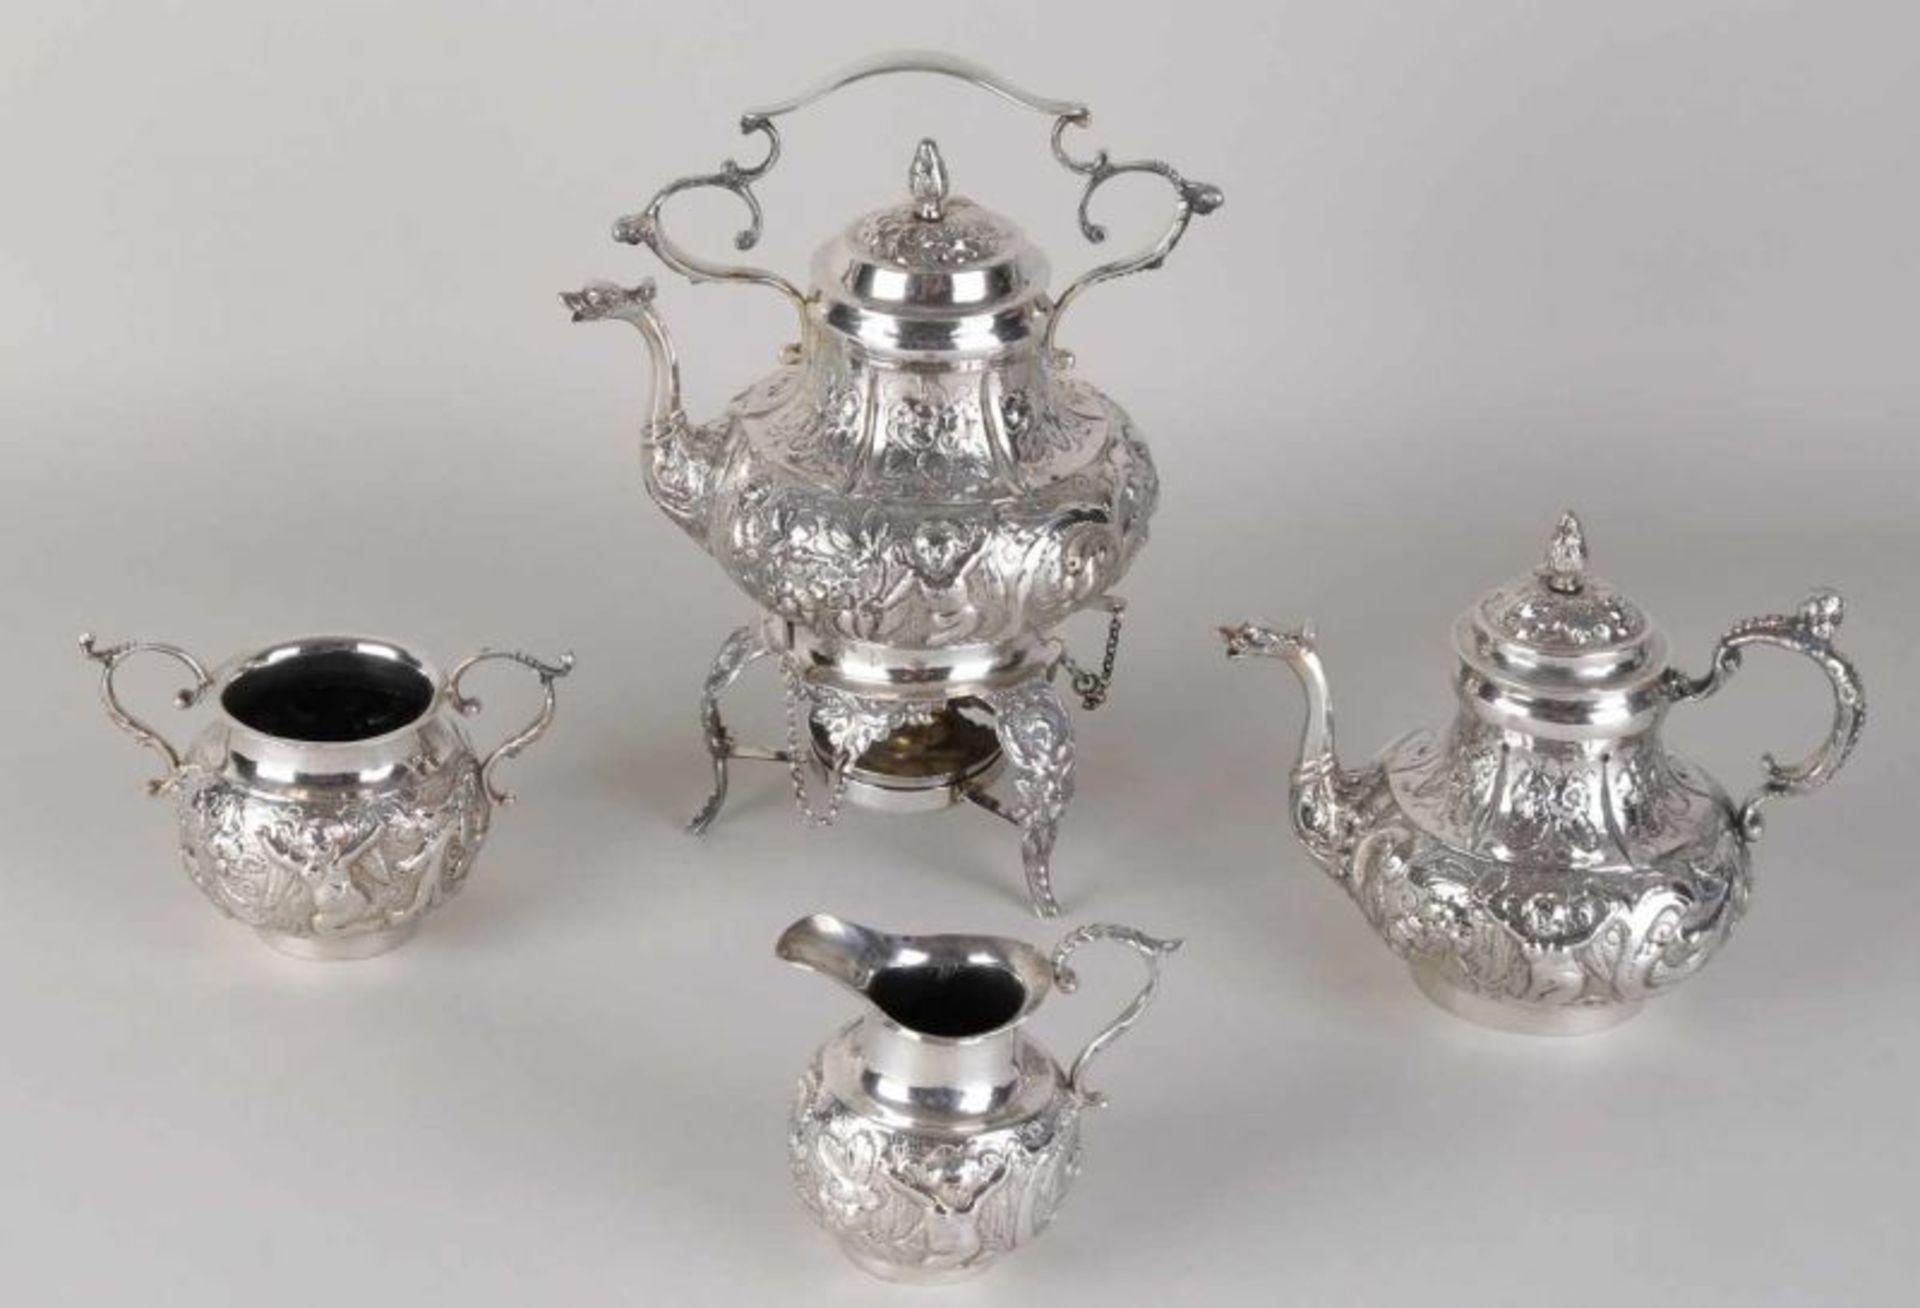 Antique silver service, 800/000, 5 parts, with coffee, tea and milk jug and a sugar bowl. The coffee